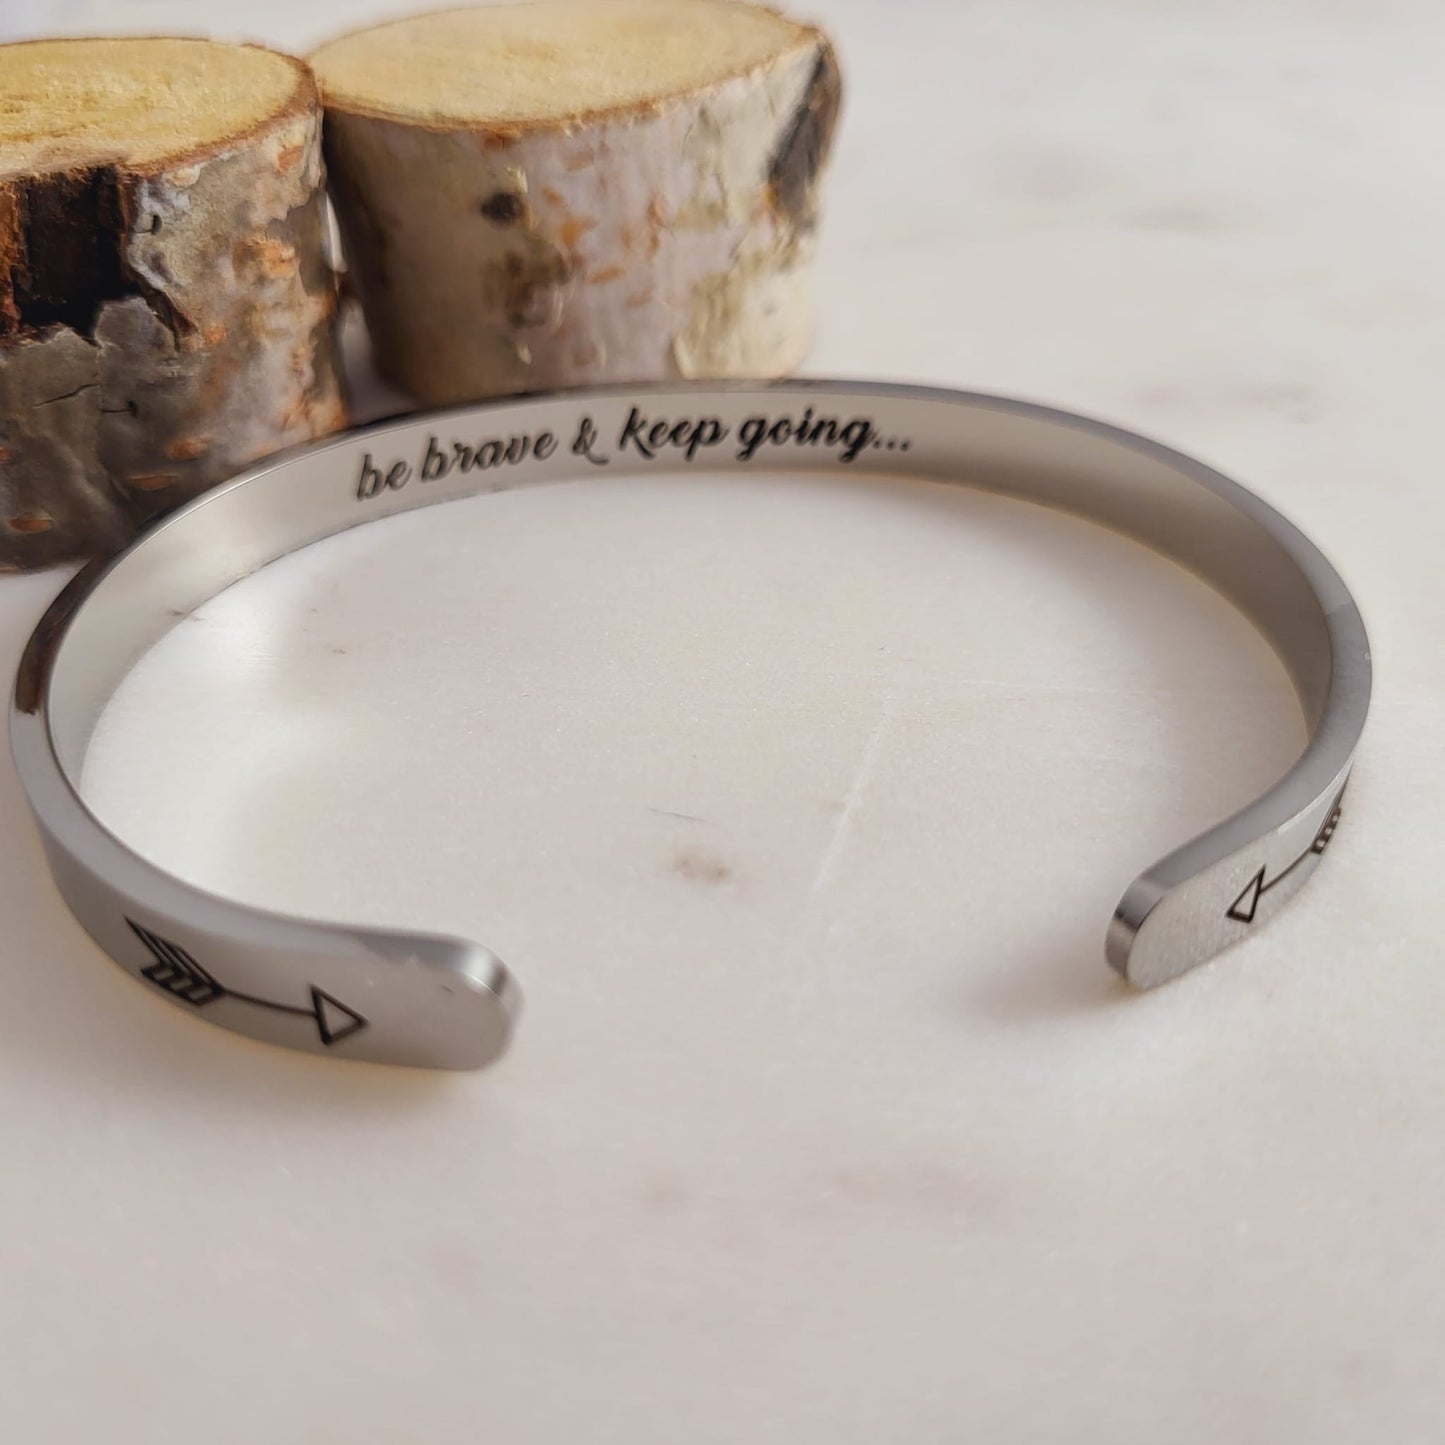 Inspirational Bracelets - Be Brave and Keep Going